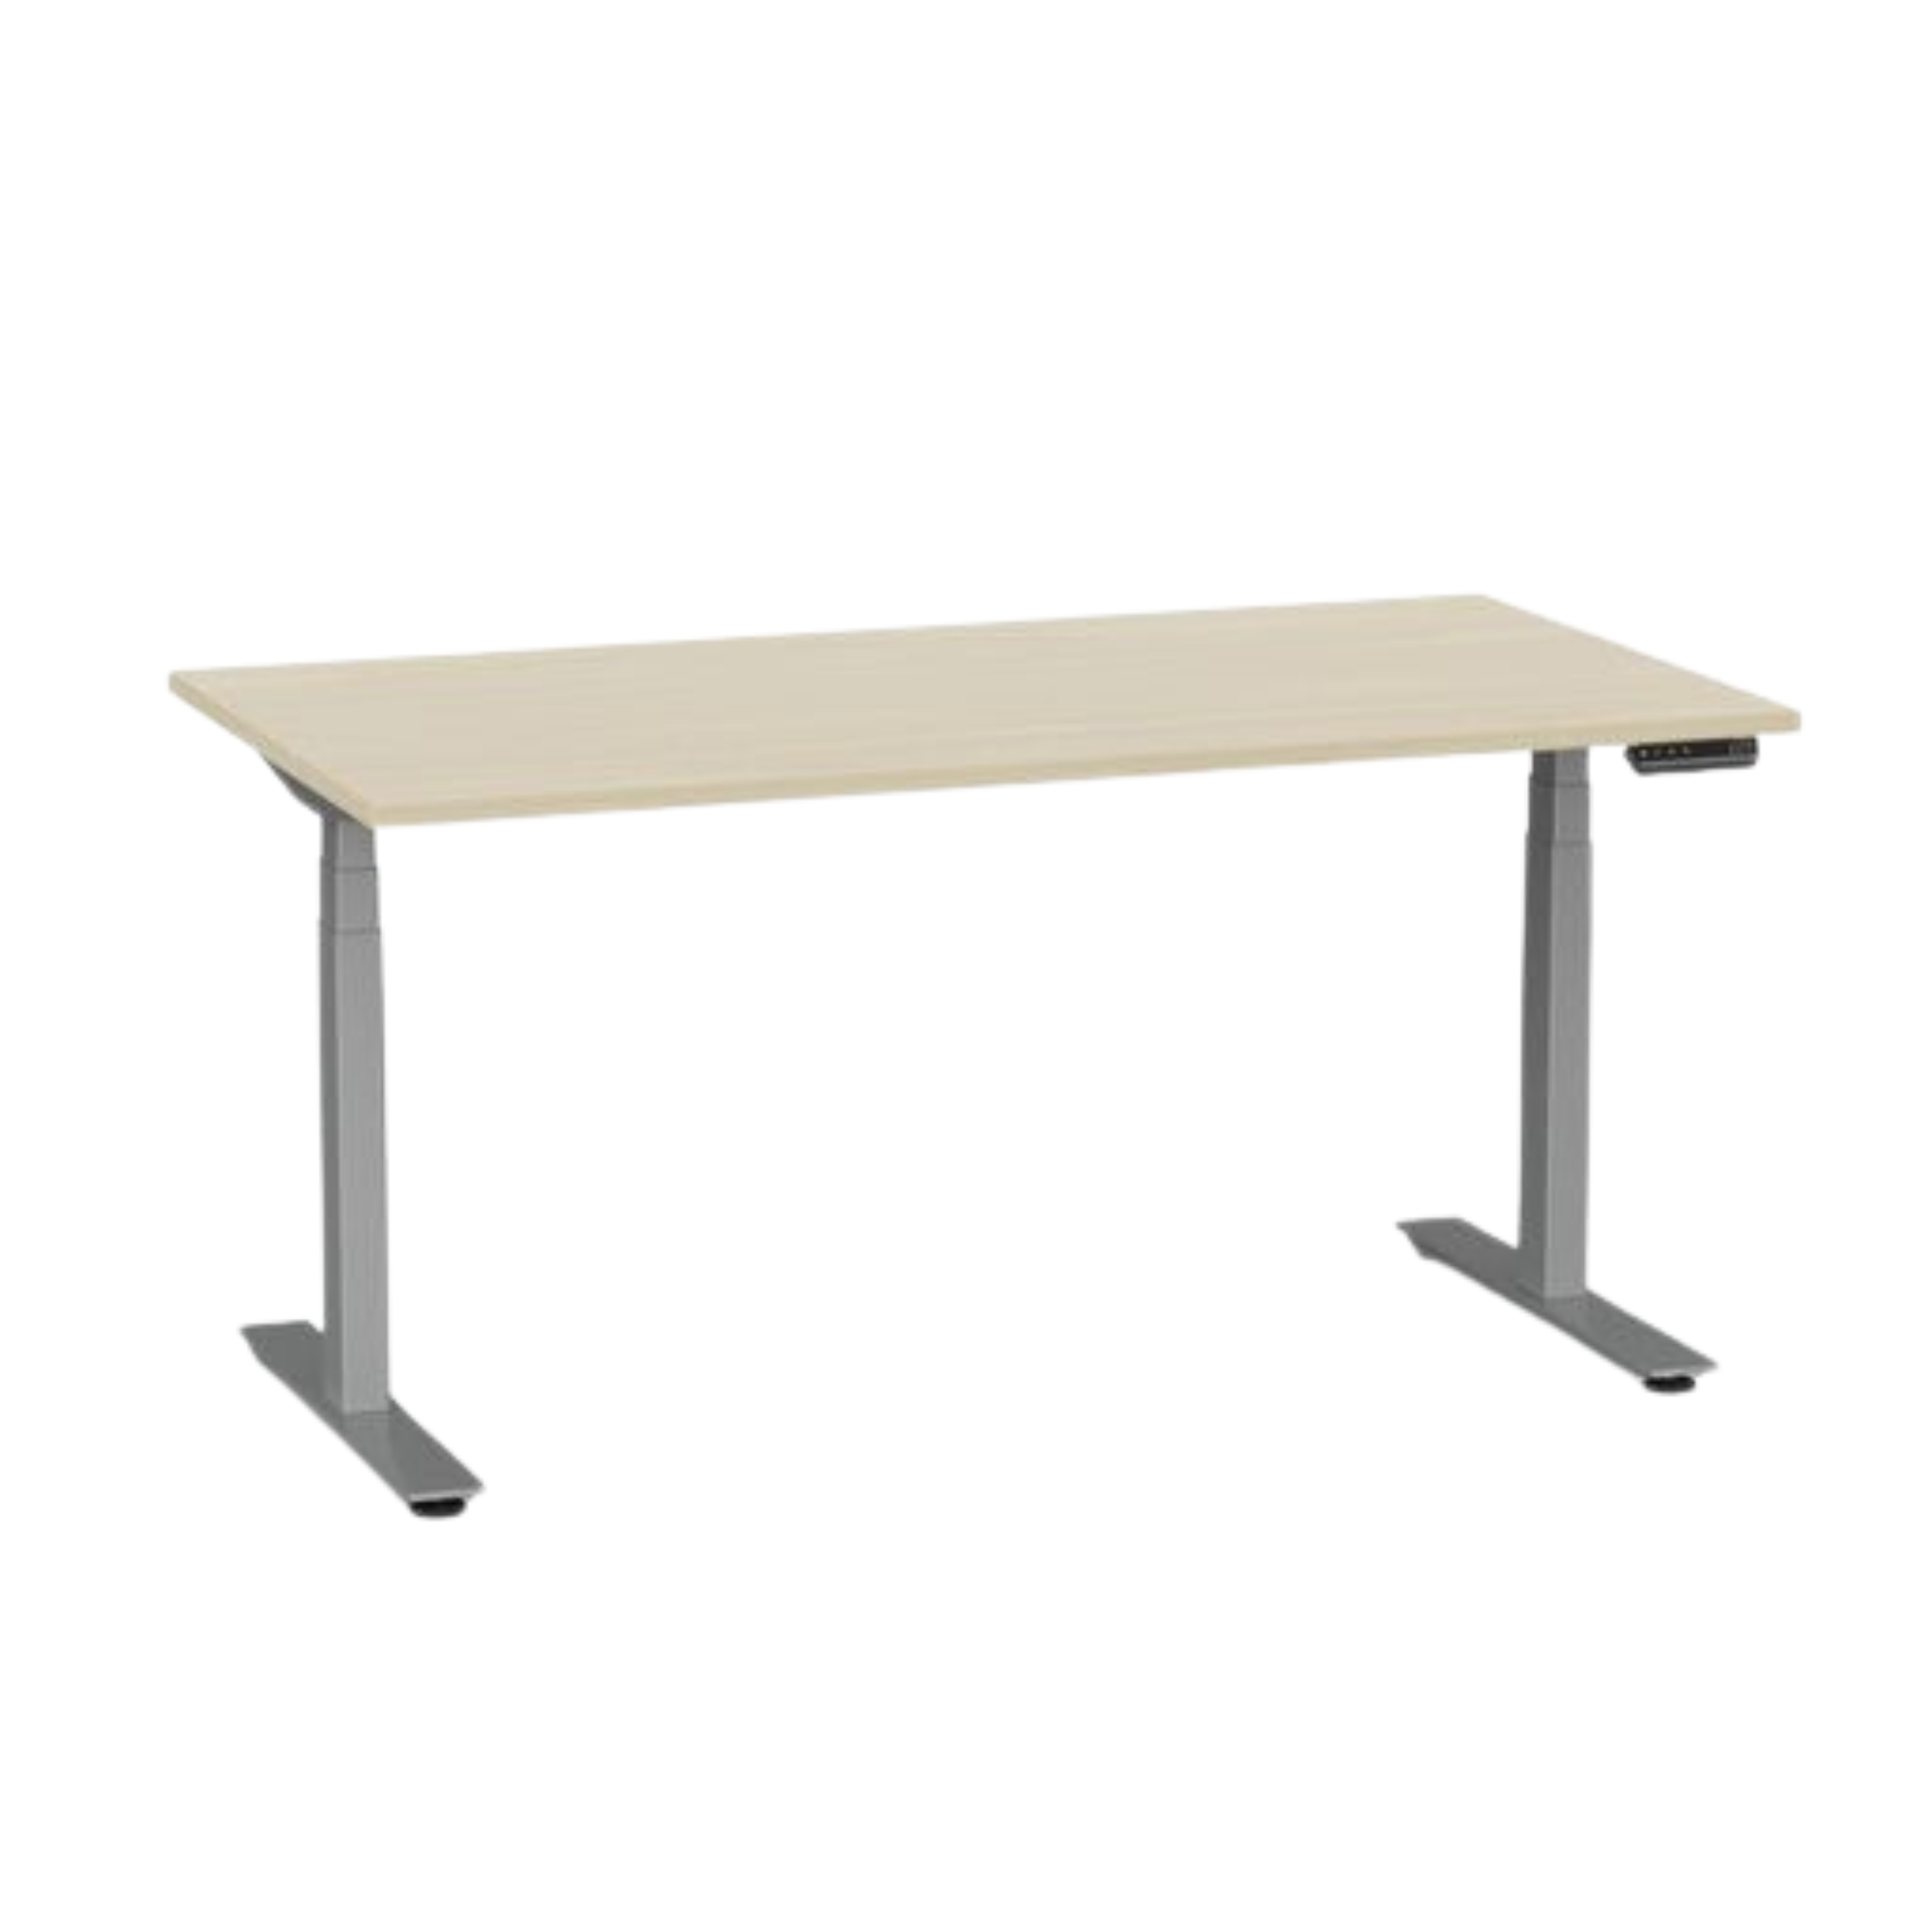 Agile Pro electric sit to stand desk with silver frame and nordic maple top